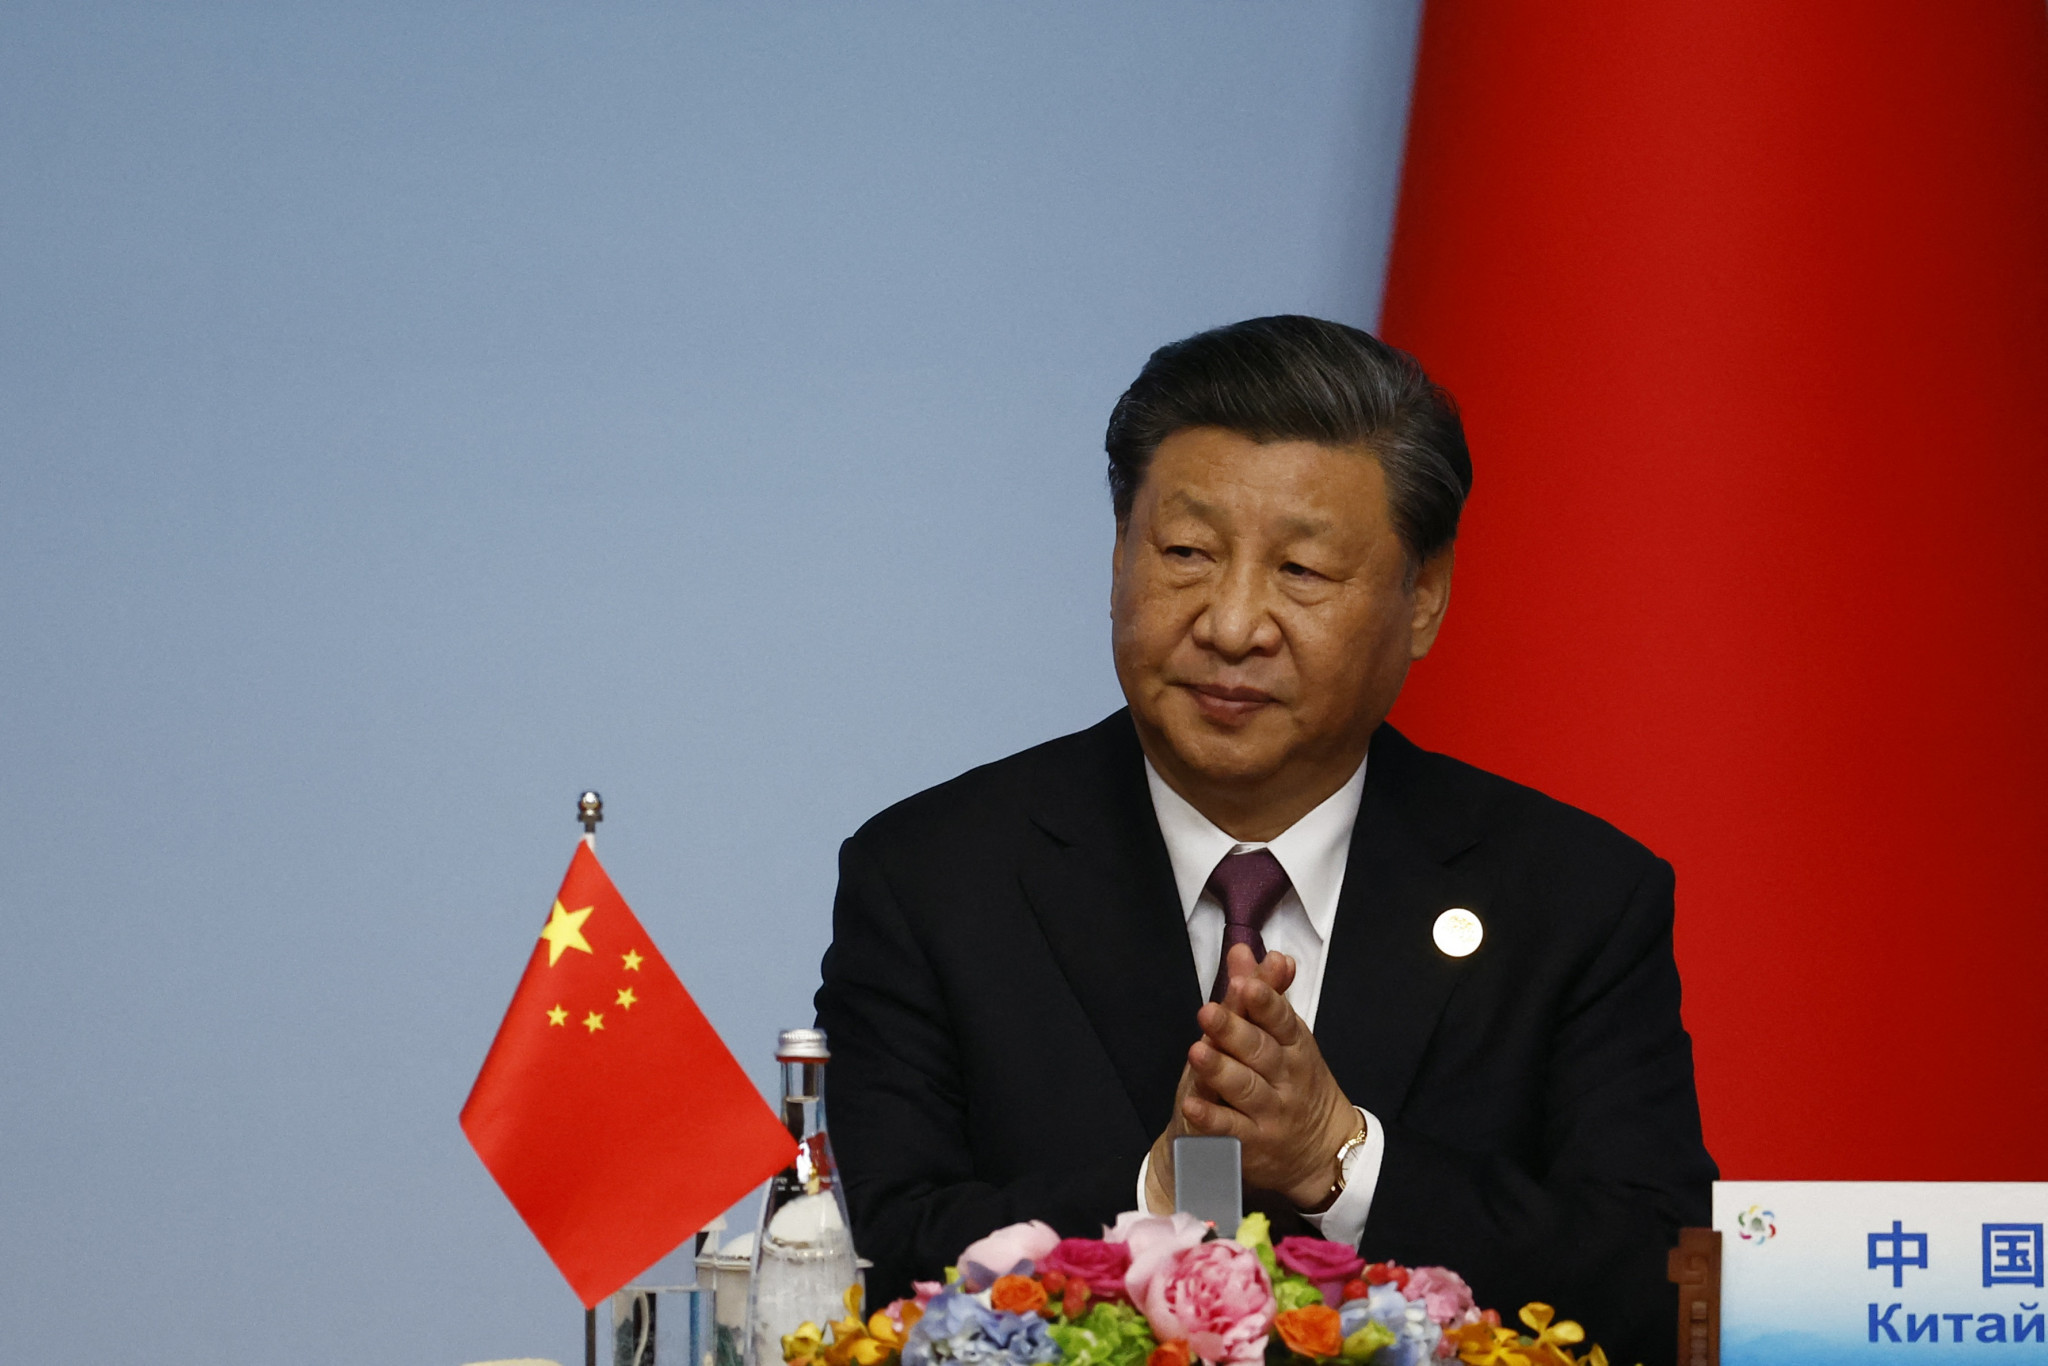 Chinese President Xi to attend Opening Ceremony of Chengdu 2021